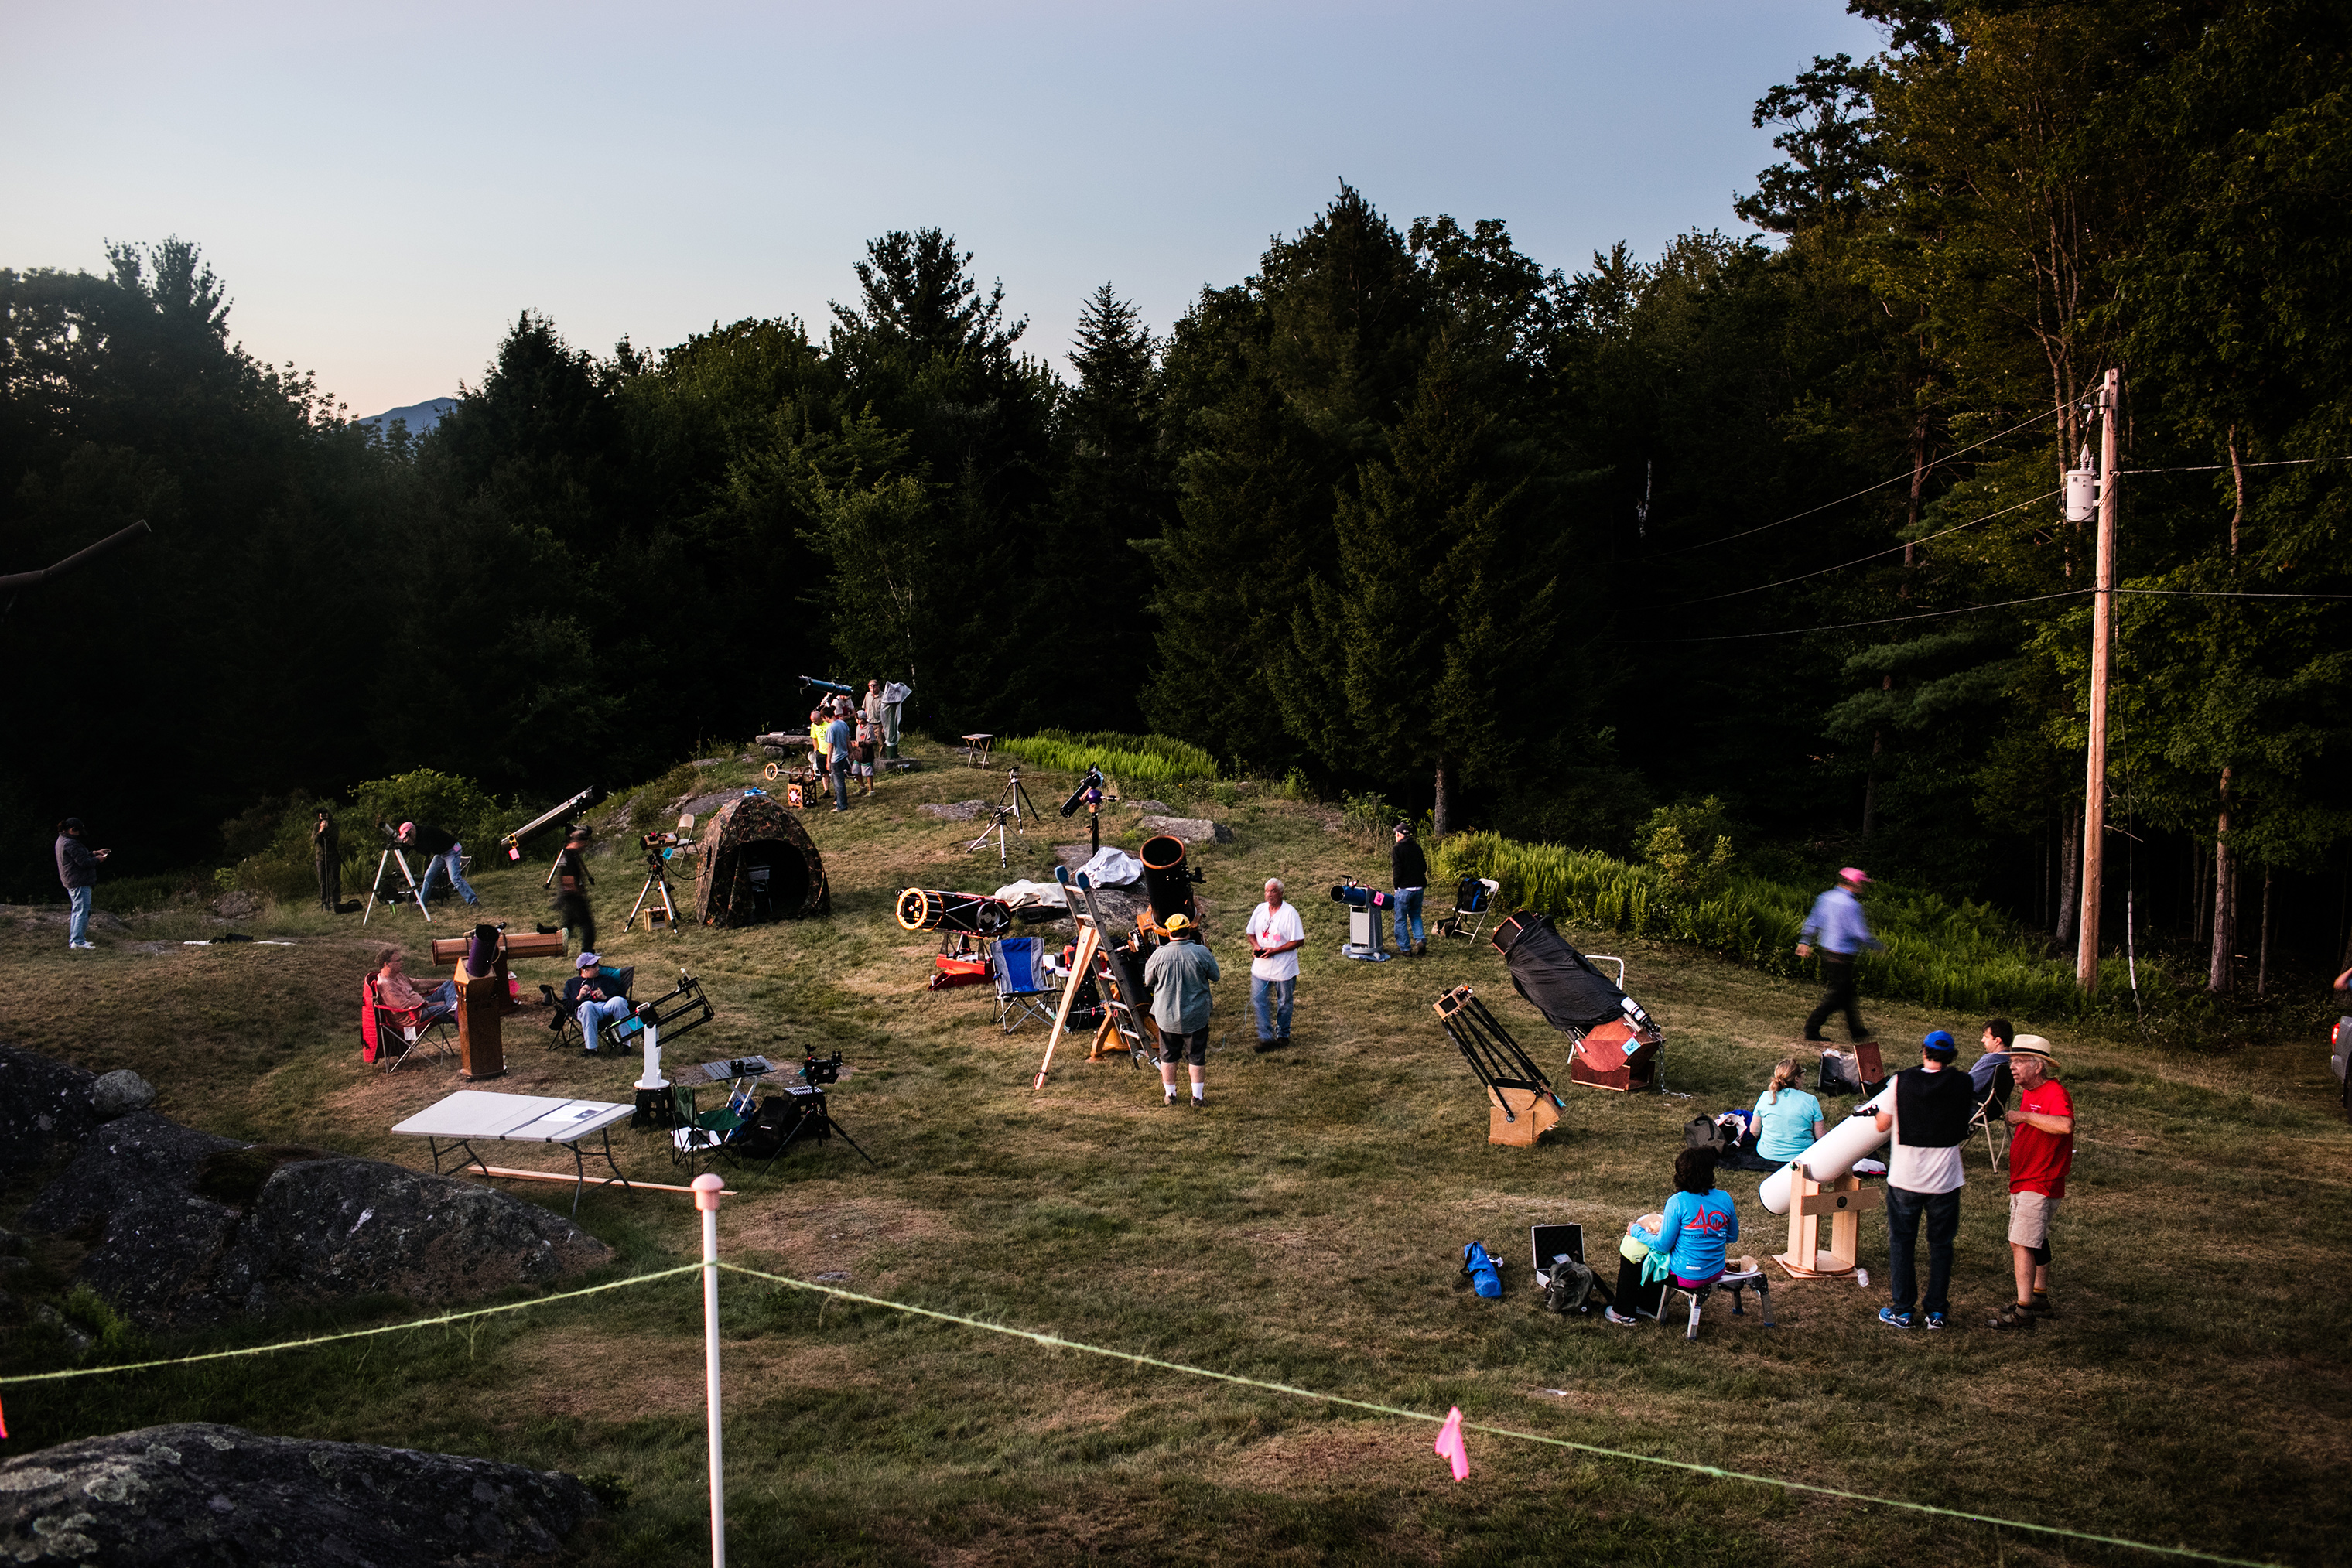 As the sun starts to set, people set up their telescopes, many of which are home-made, on Breezy Hill in Springfield, Vermont. (Robert Ormerod for TIME)